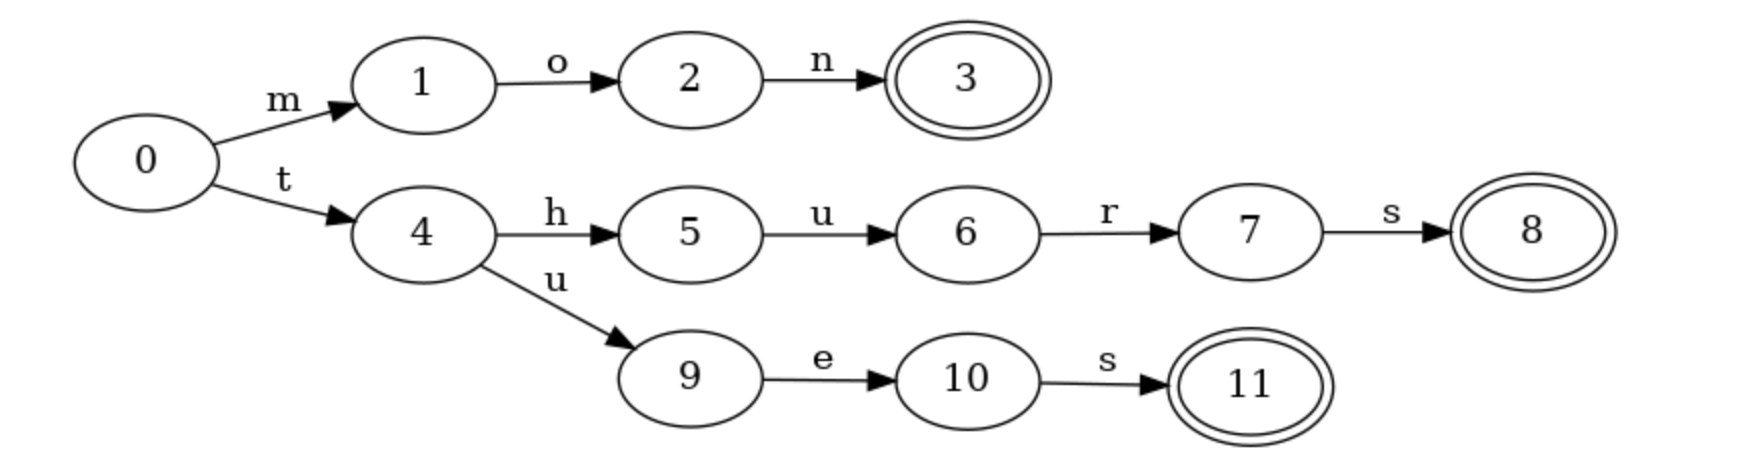 A prefix trie that accepts several different words